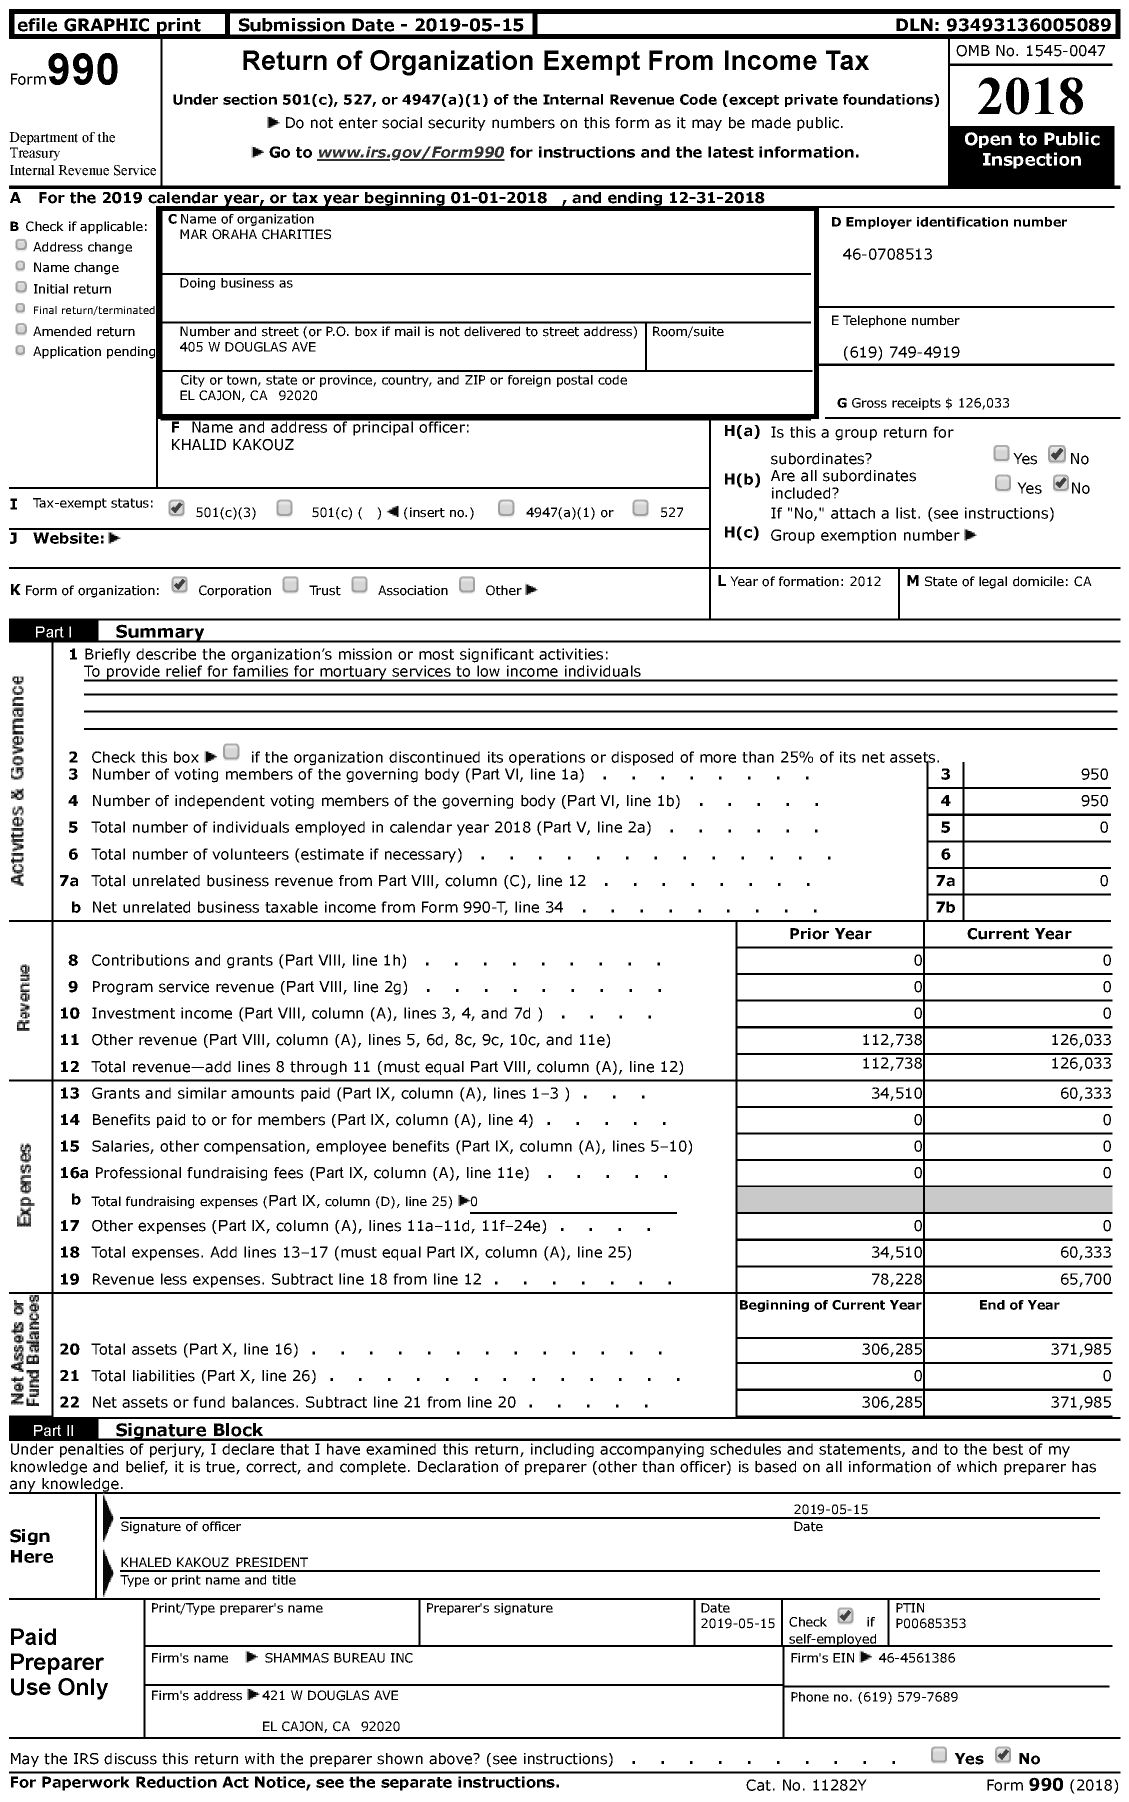 Image of first page of 2018 Form 990 for Mar Oraha Charities